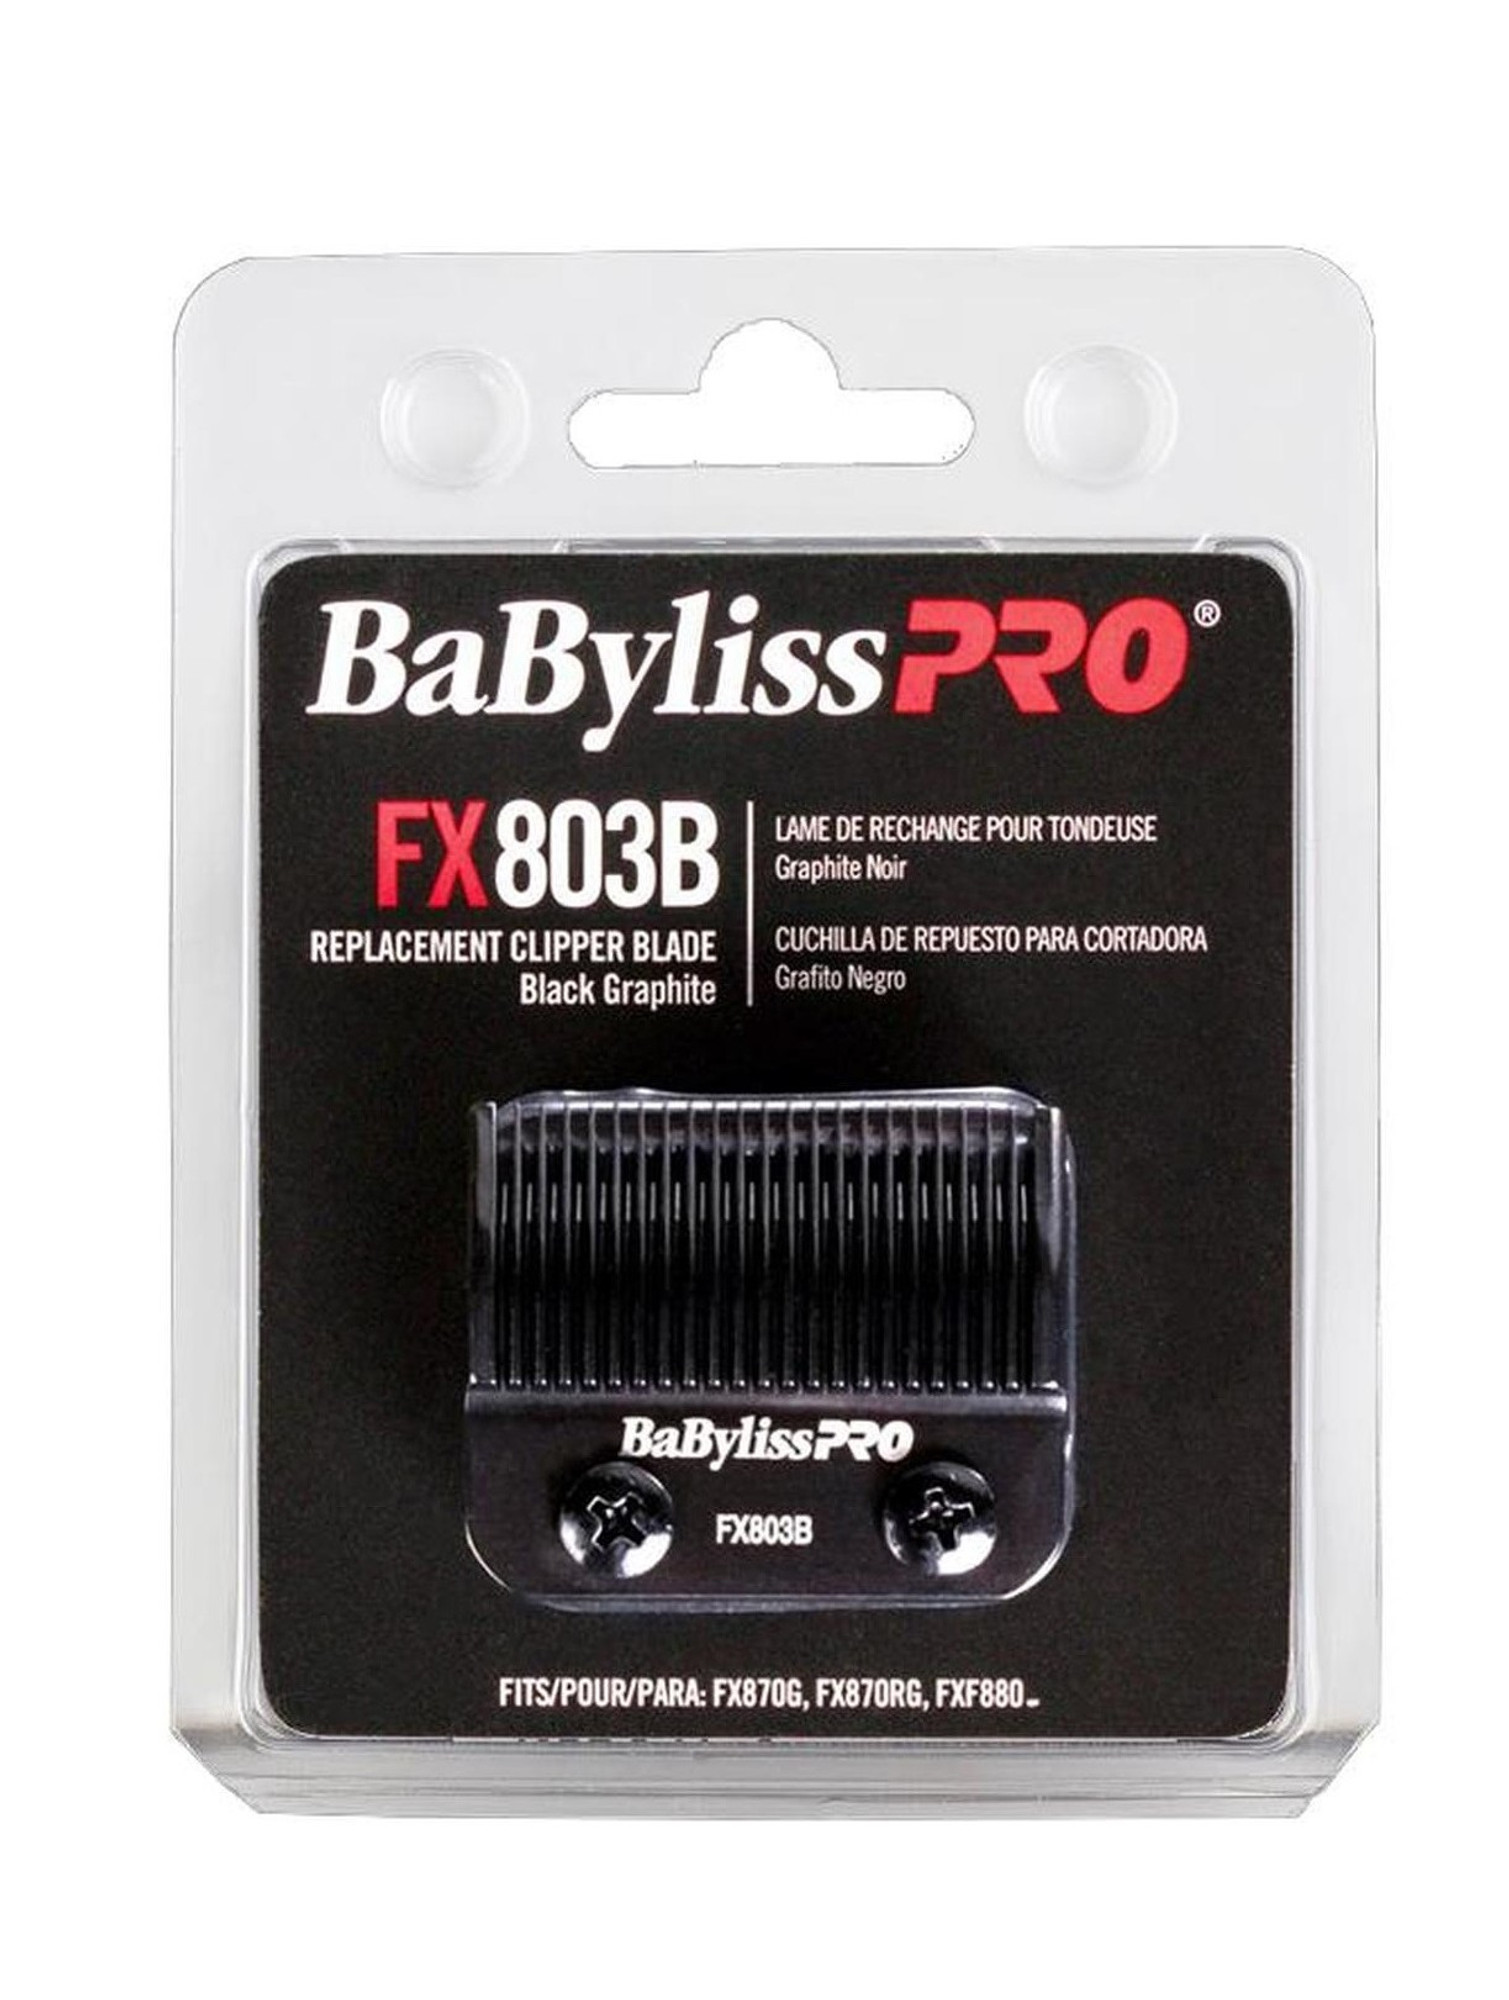 BaBylissPRO FX803B Replacement Clipper Blade